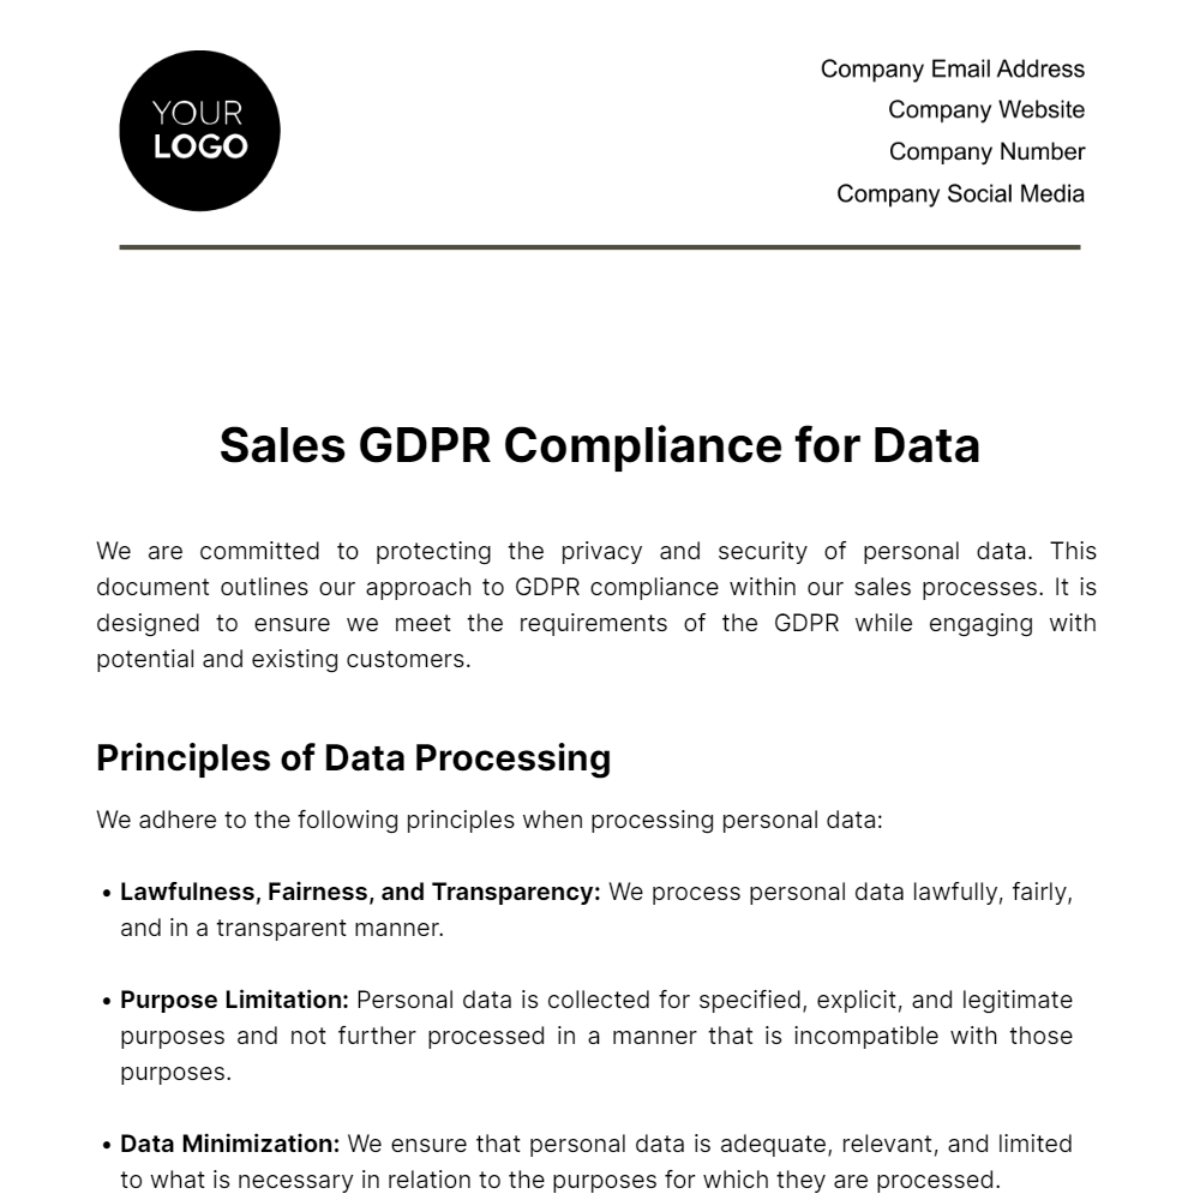 Sales GDPR Compliance for Data Template